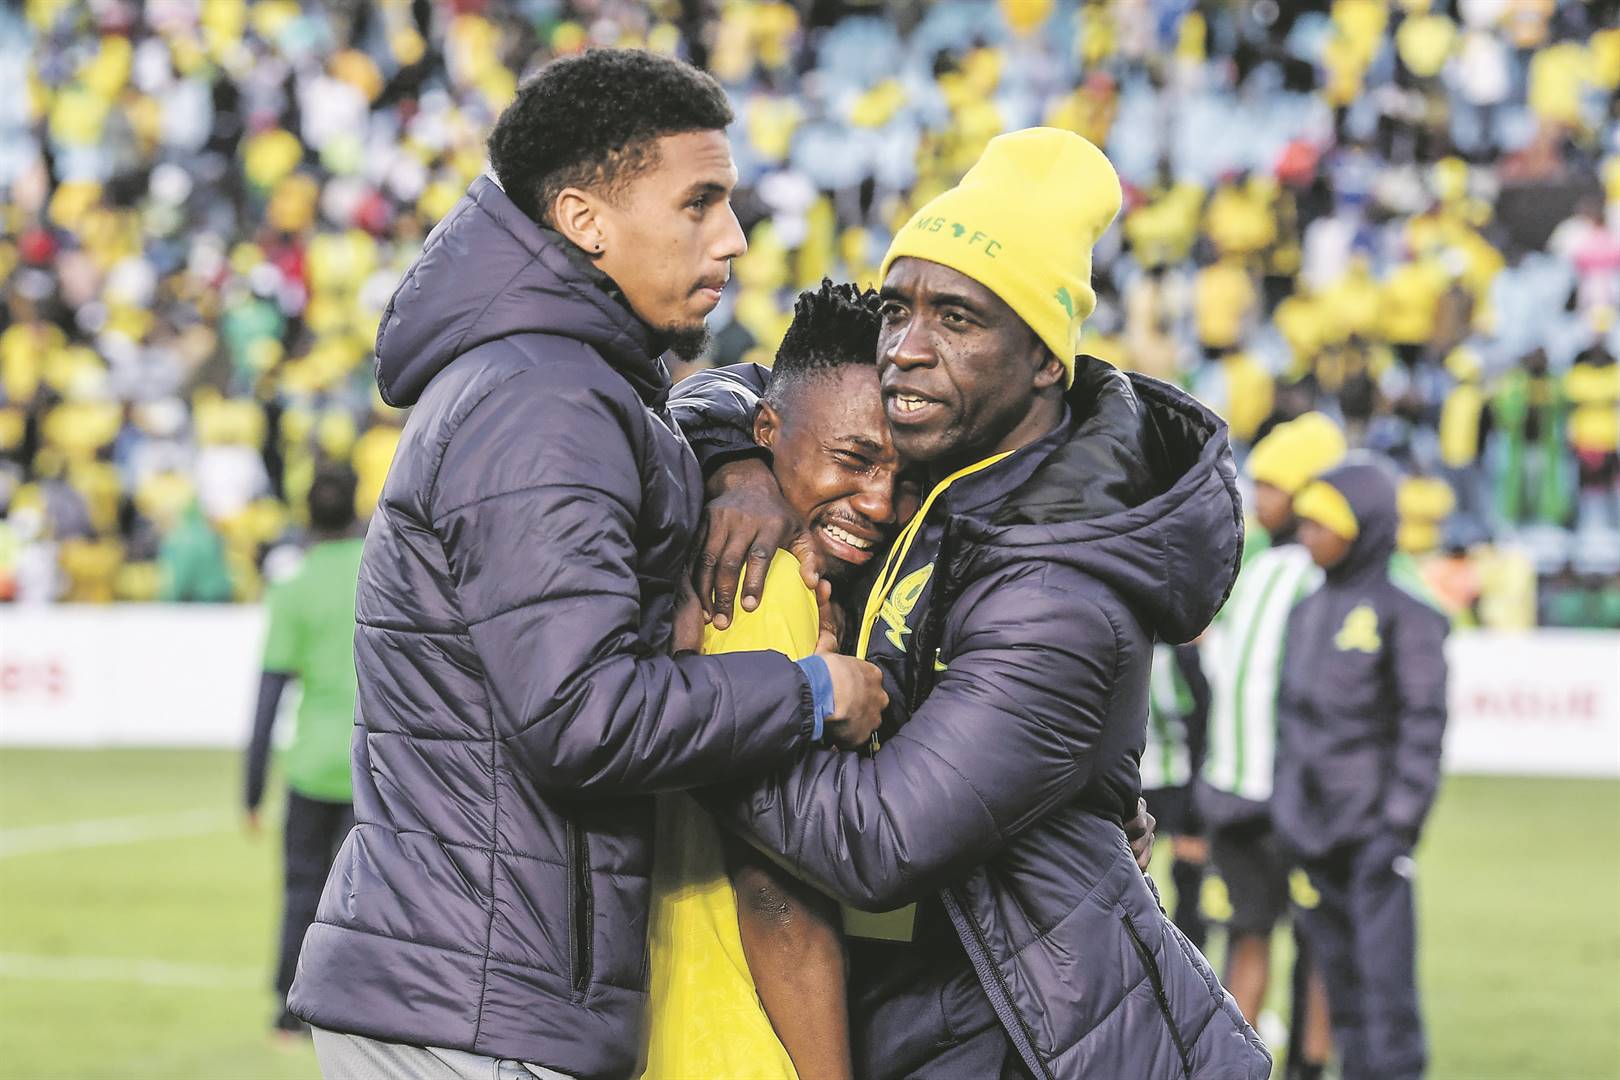 Distraught Mamelodi Sundowns starlet Cassius Mailula is comforted by David Notoane and Rushine De Reuck after their team was eliminated from the CAF Champions League by Wydad Athletic at Loftus Stadium in Pretoria yesterday PHOTO: Lefty Shivambu / Gallo Images